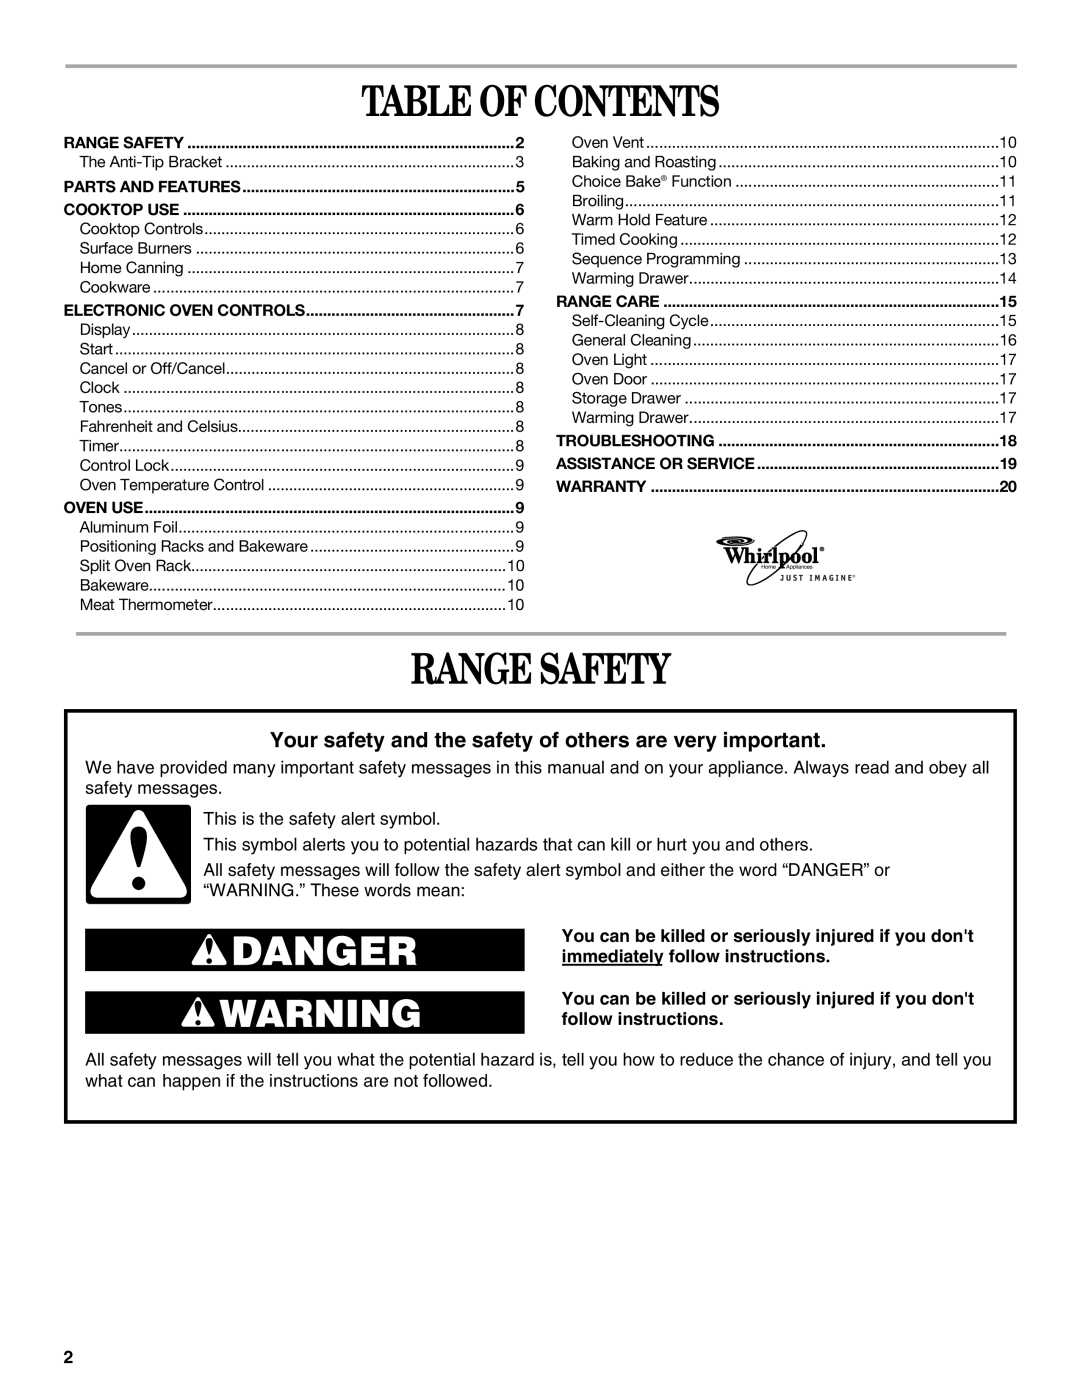 Whirlpool SF367LEMB0 manual Table Of Contents, Range Safety, Your safety and the safety of others are very important 